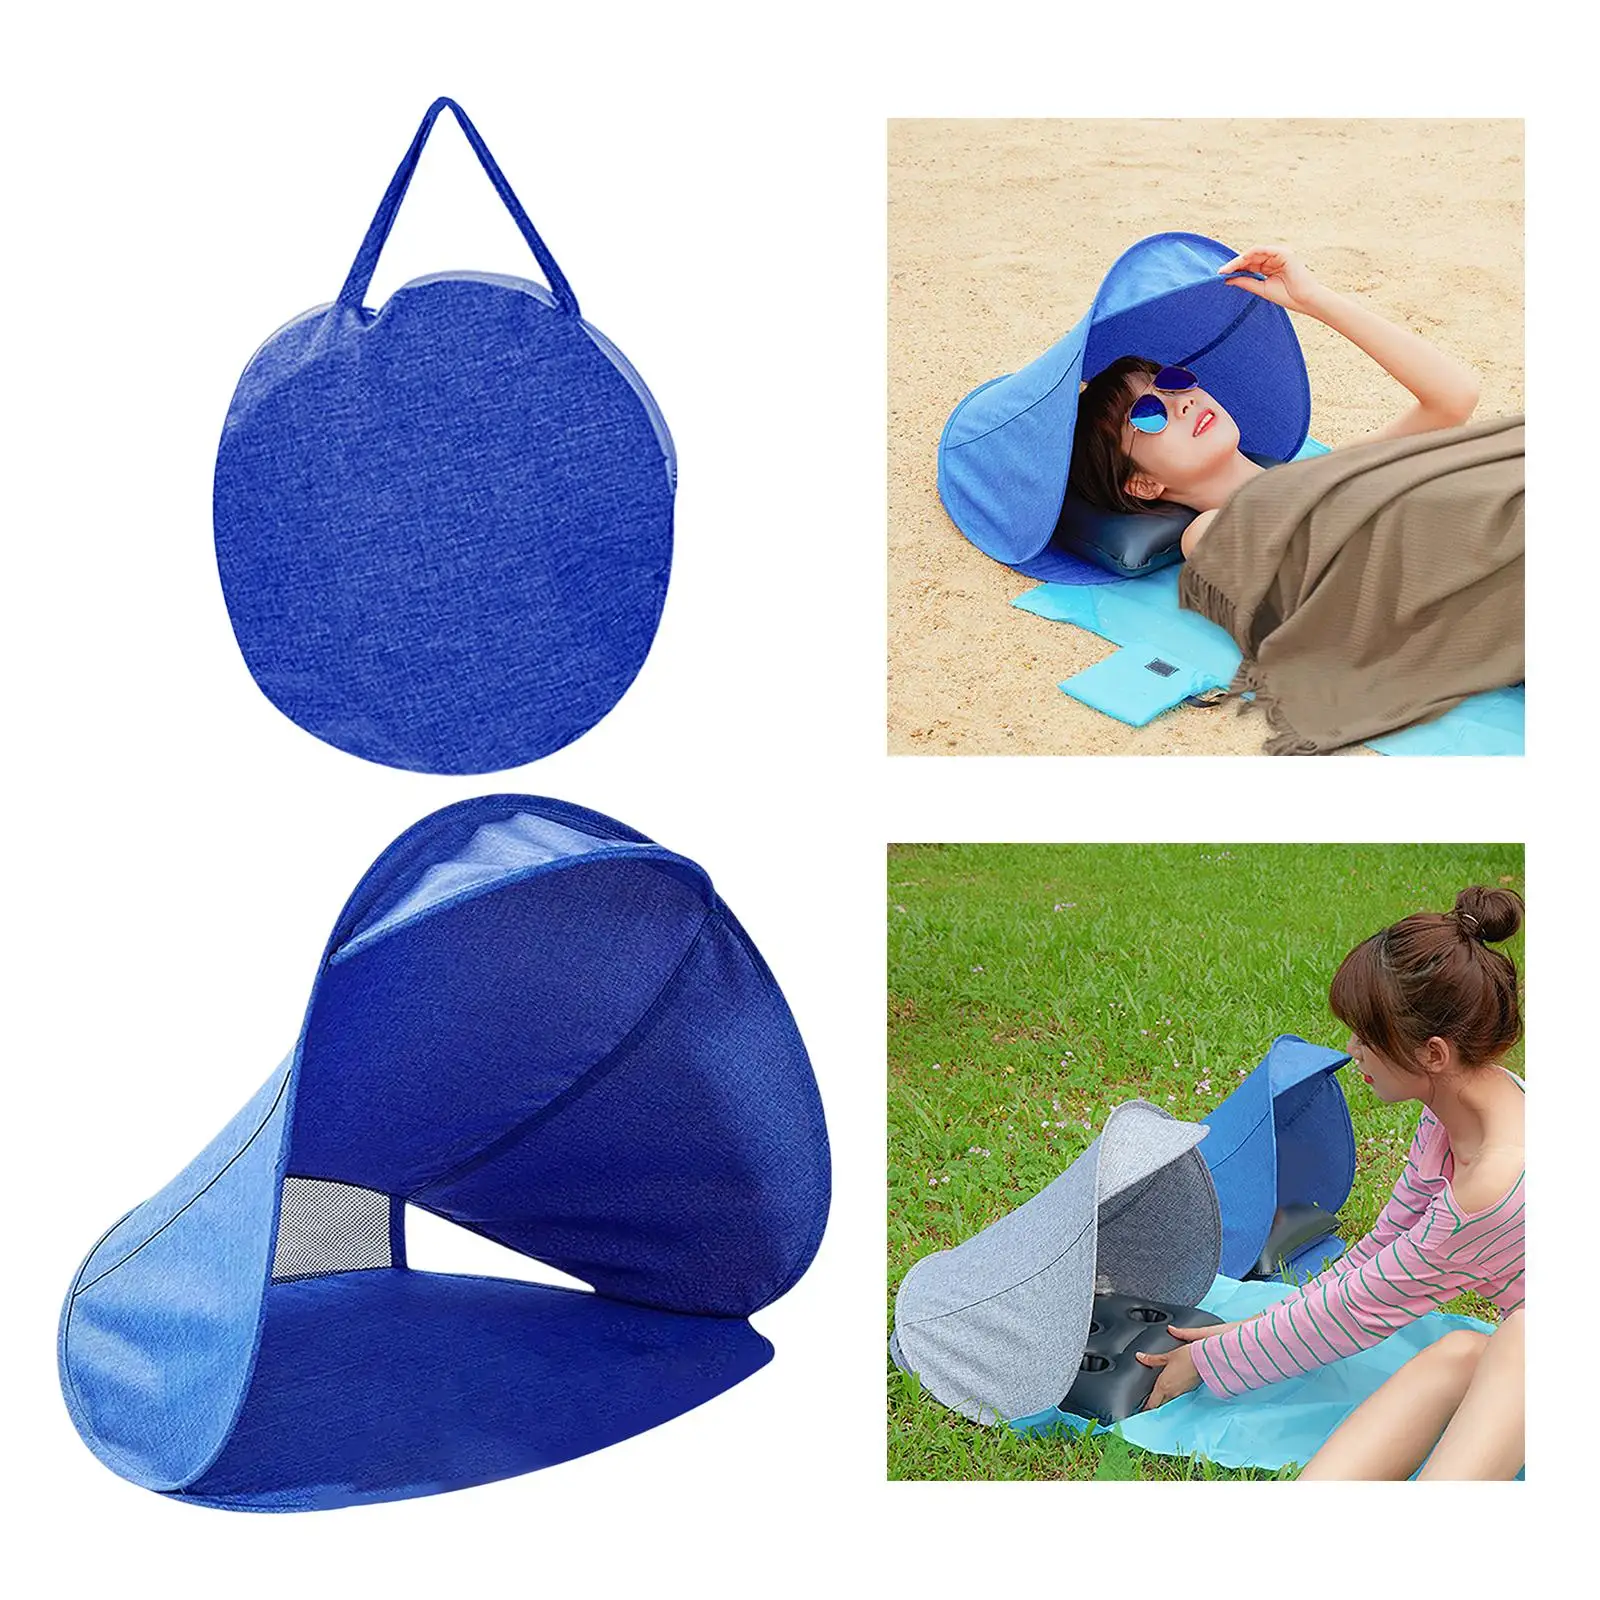  Foldable Protection Face Tent Portable Sun Shelter for Outdoor Camping